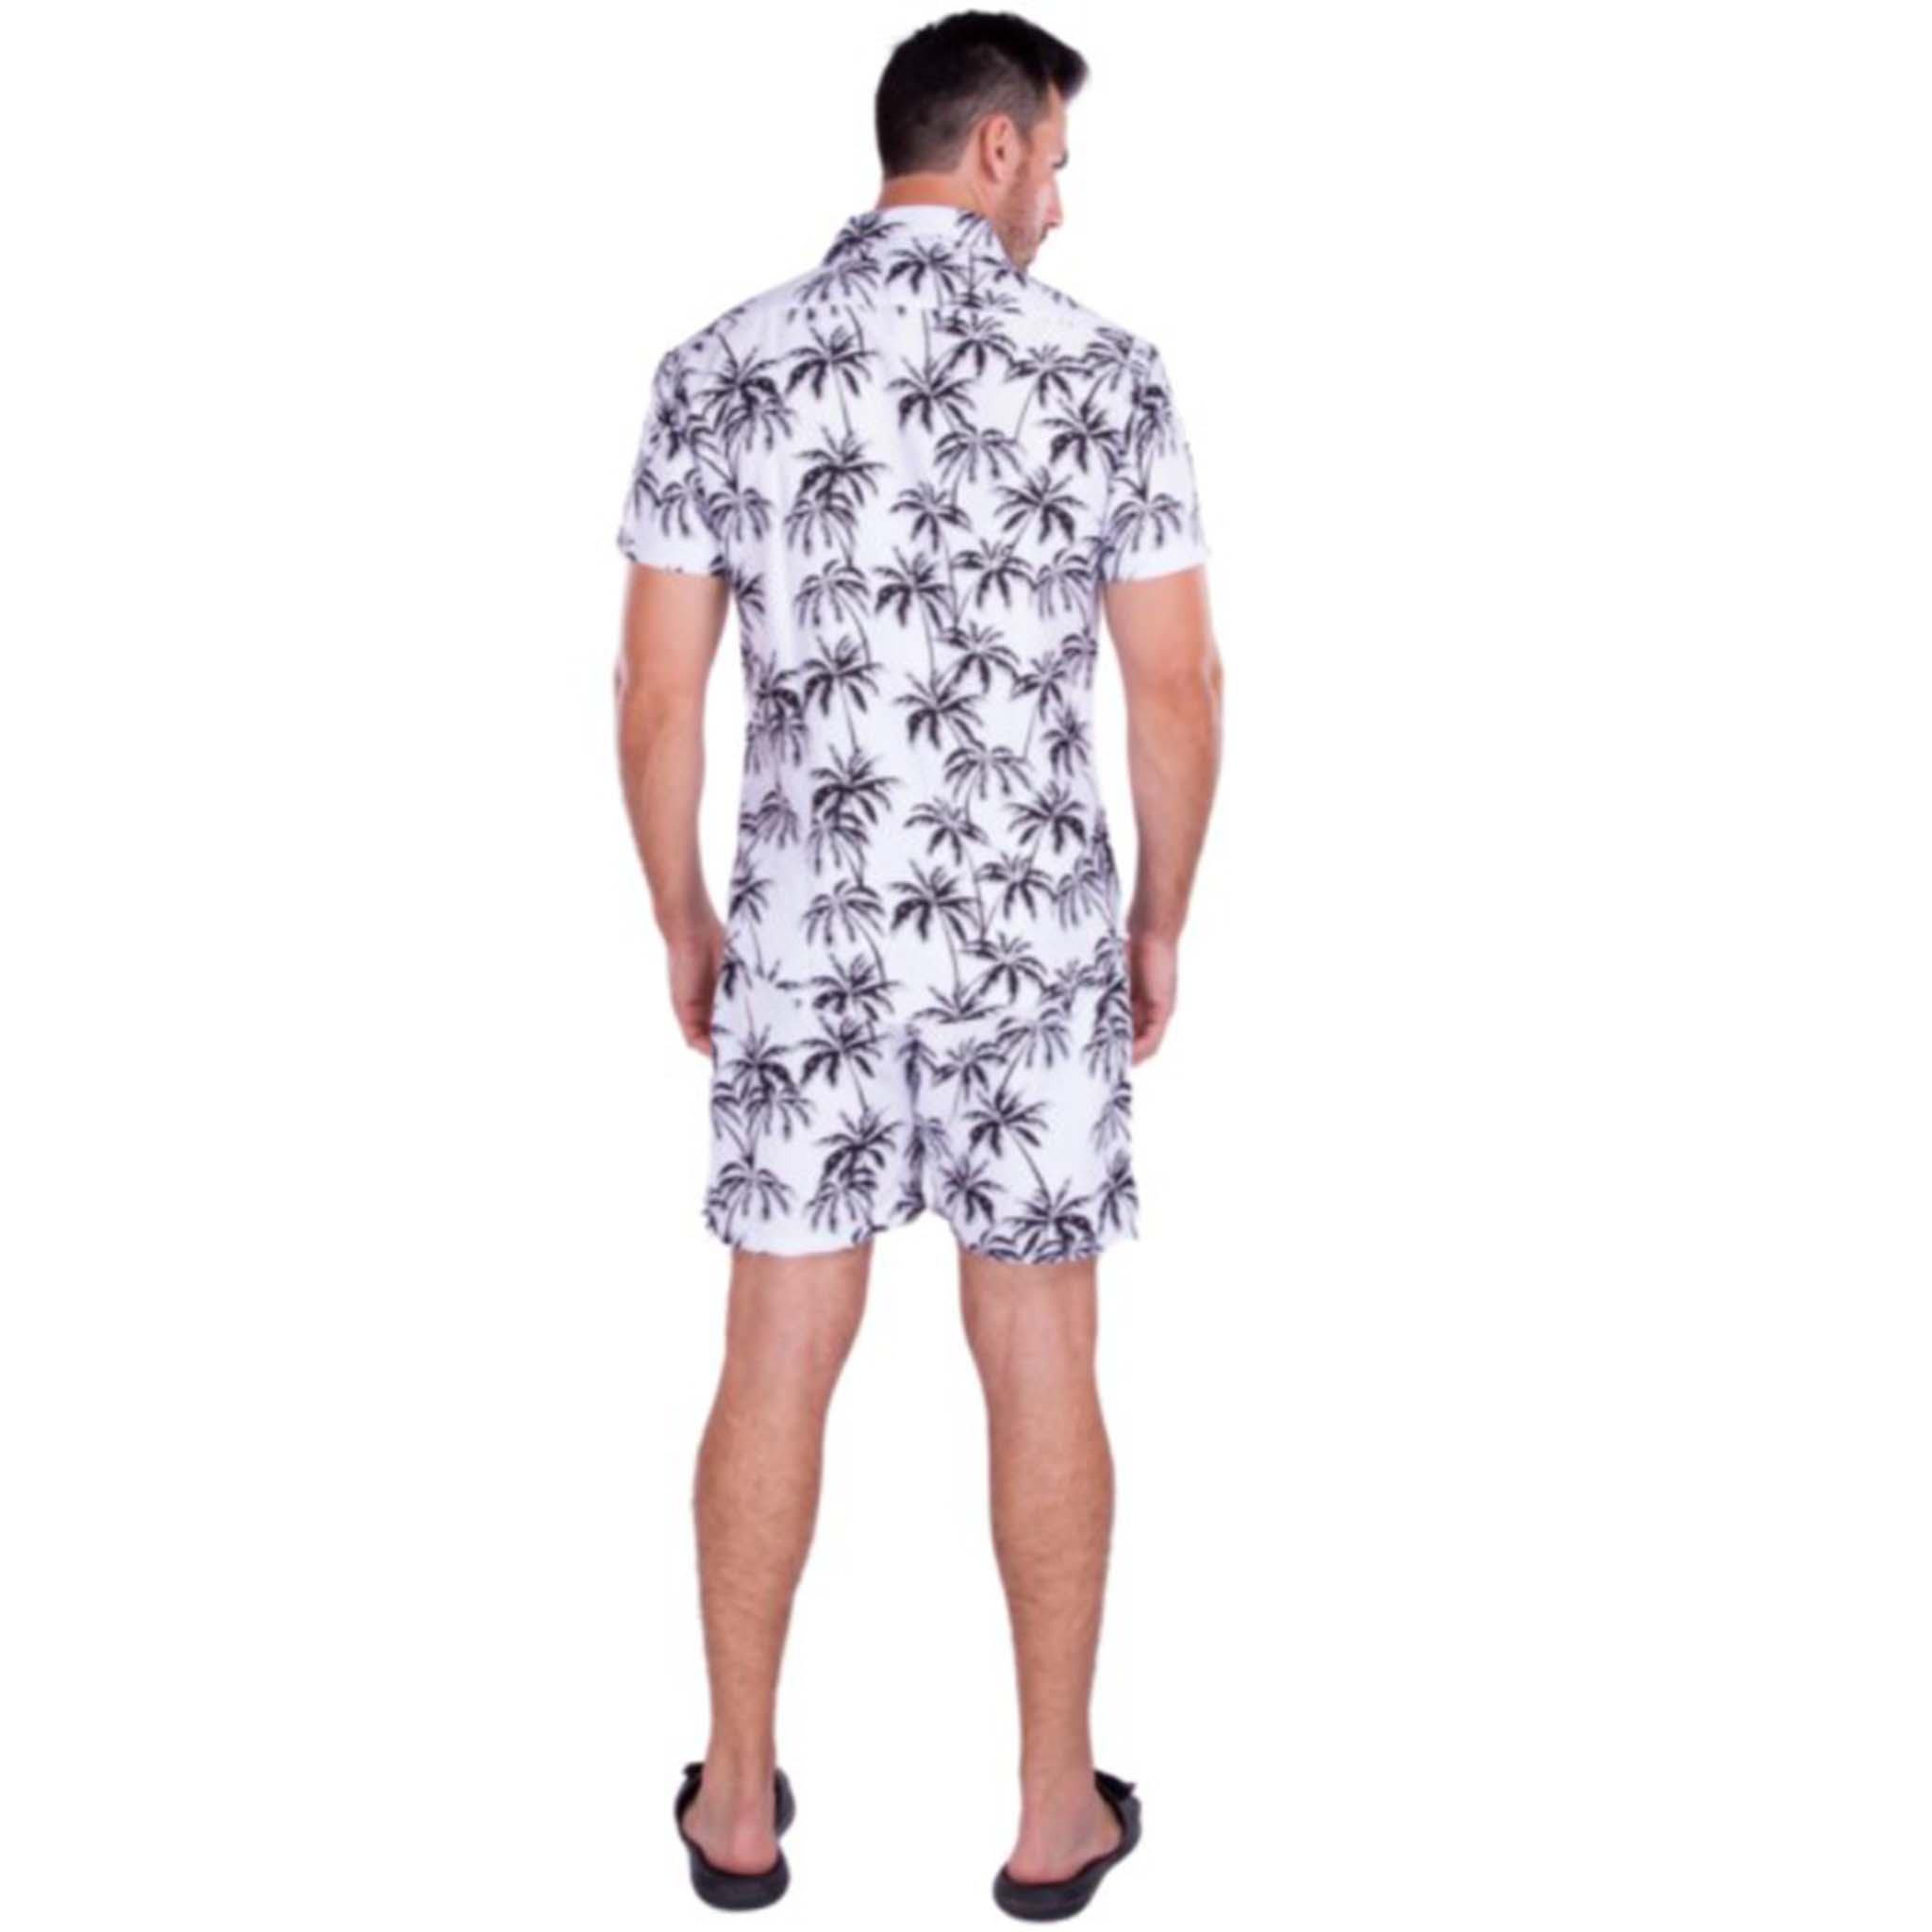 Get Ready for Summer with the White Tropical Print Short Set at DNK Mobile